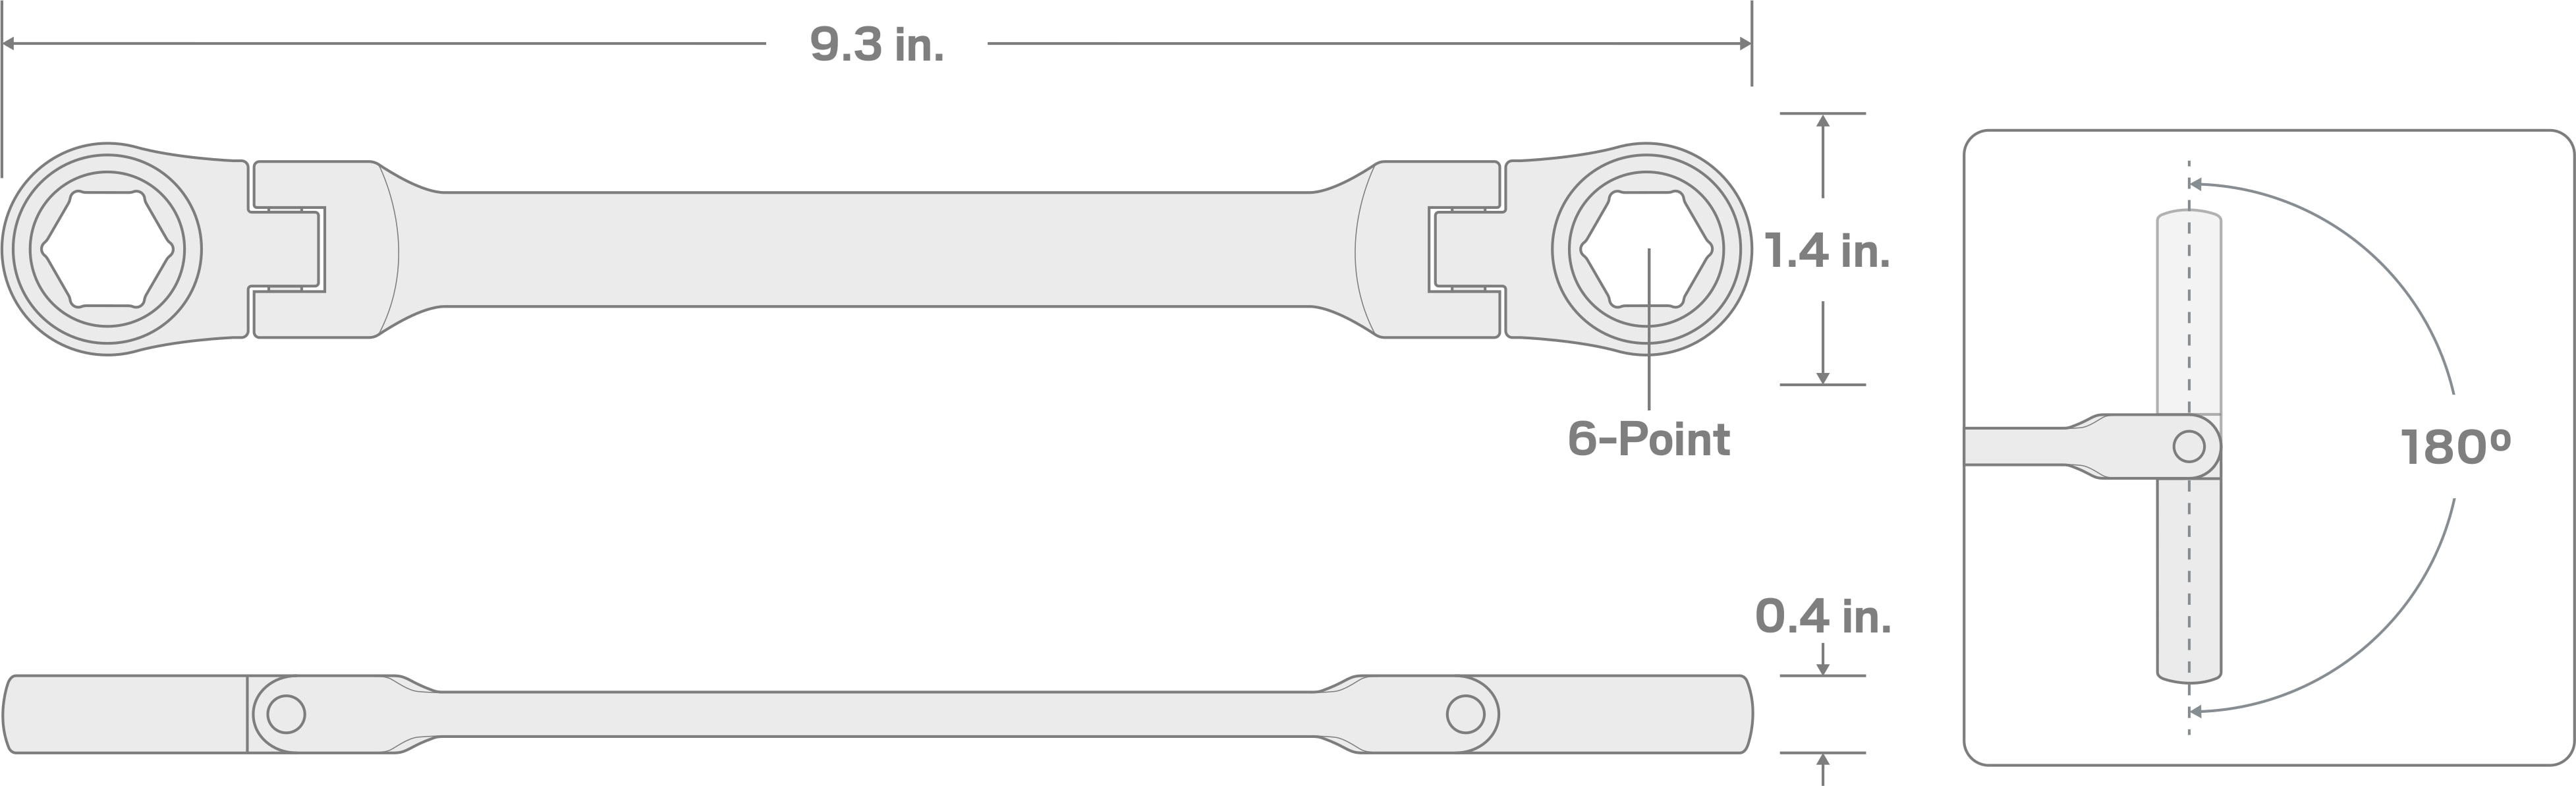 Specs for 16 x 18 mm Flex Ratcheting Box End Wrench